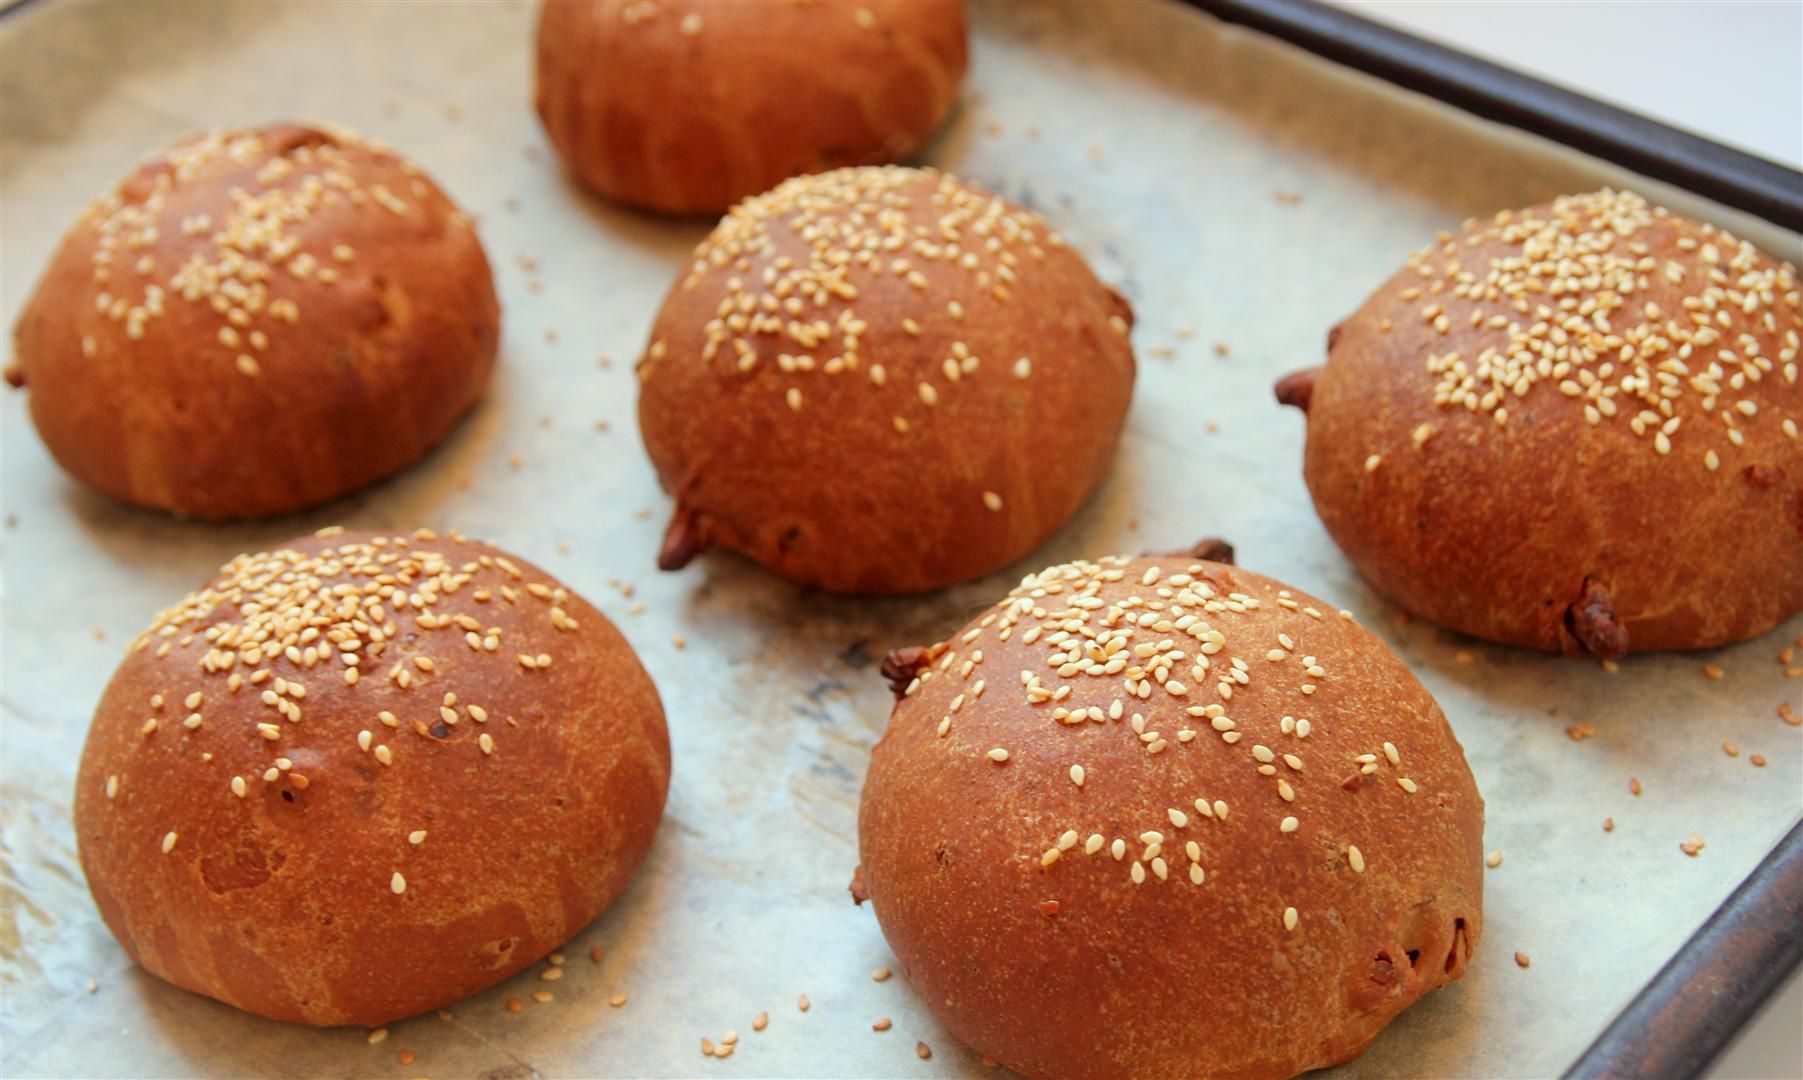 Whole Wheat Rolls with Walnuts